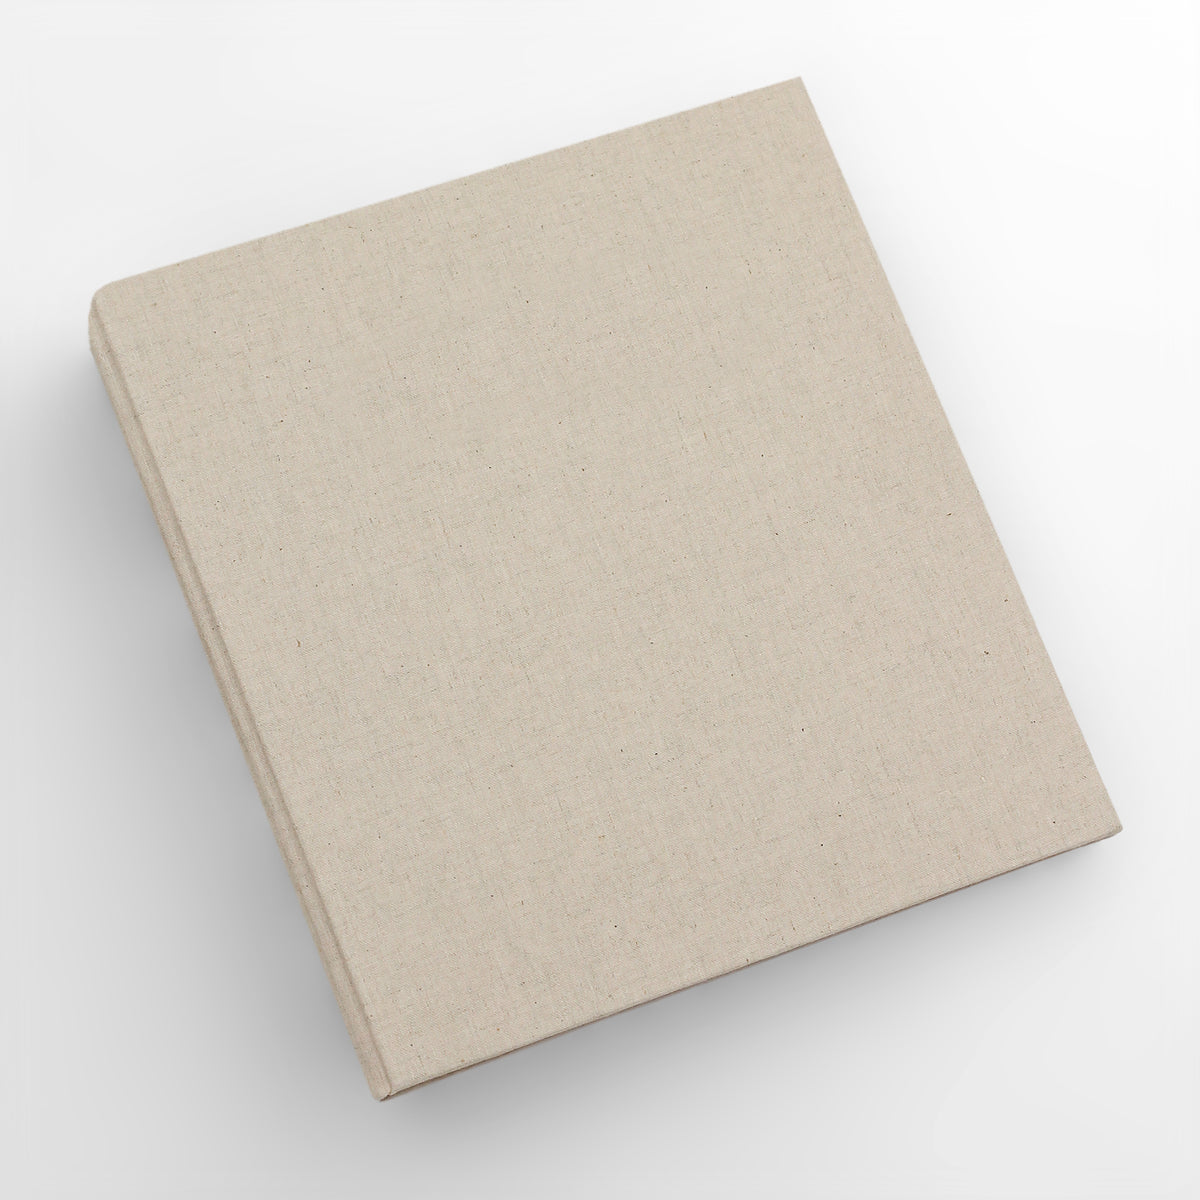 Large Photo Binder For 8x10 Photos | Cover: Natural Linen | Available Personalized